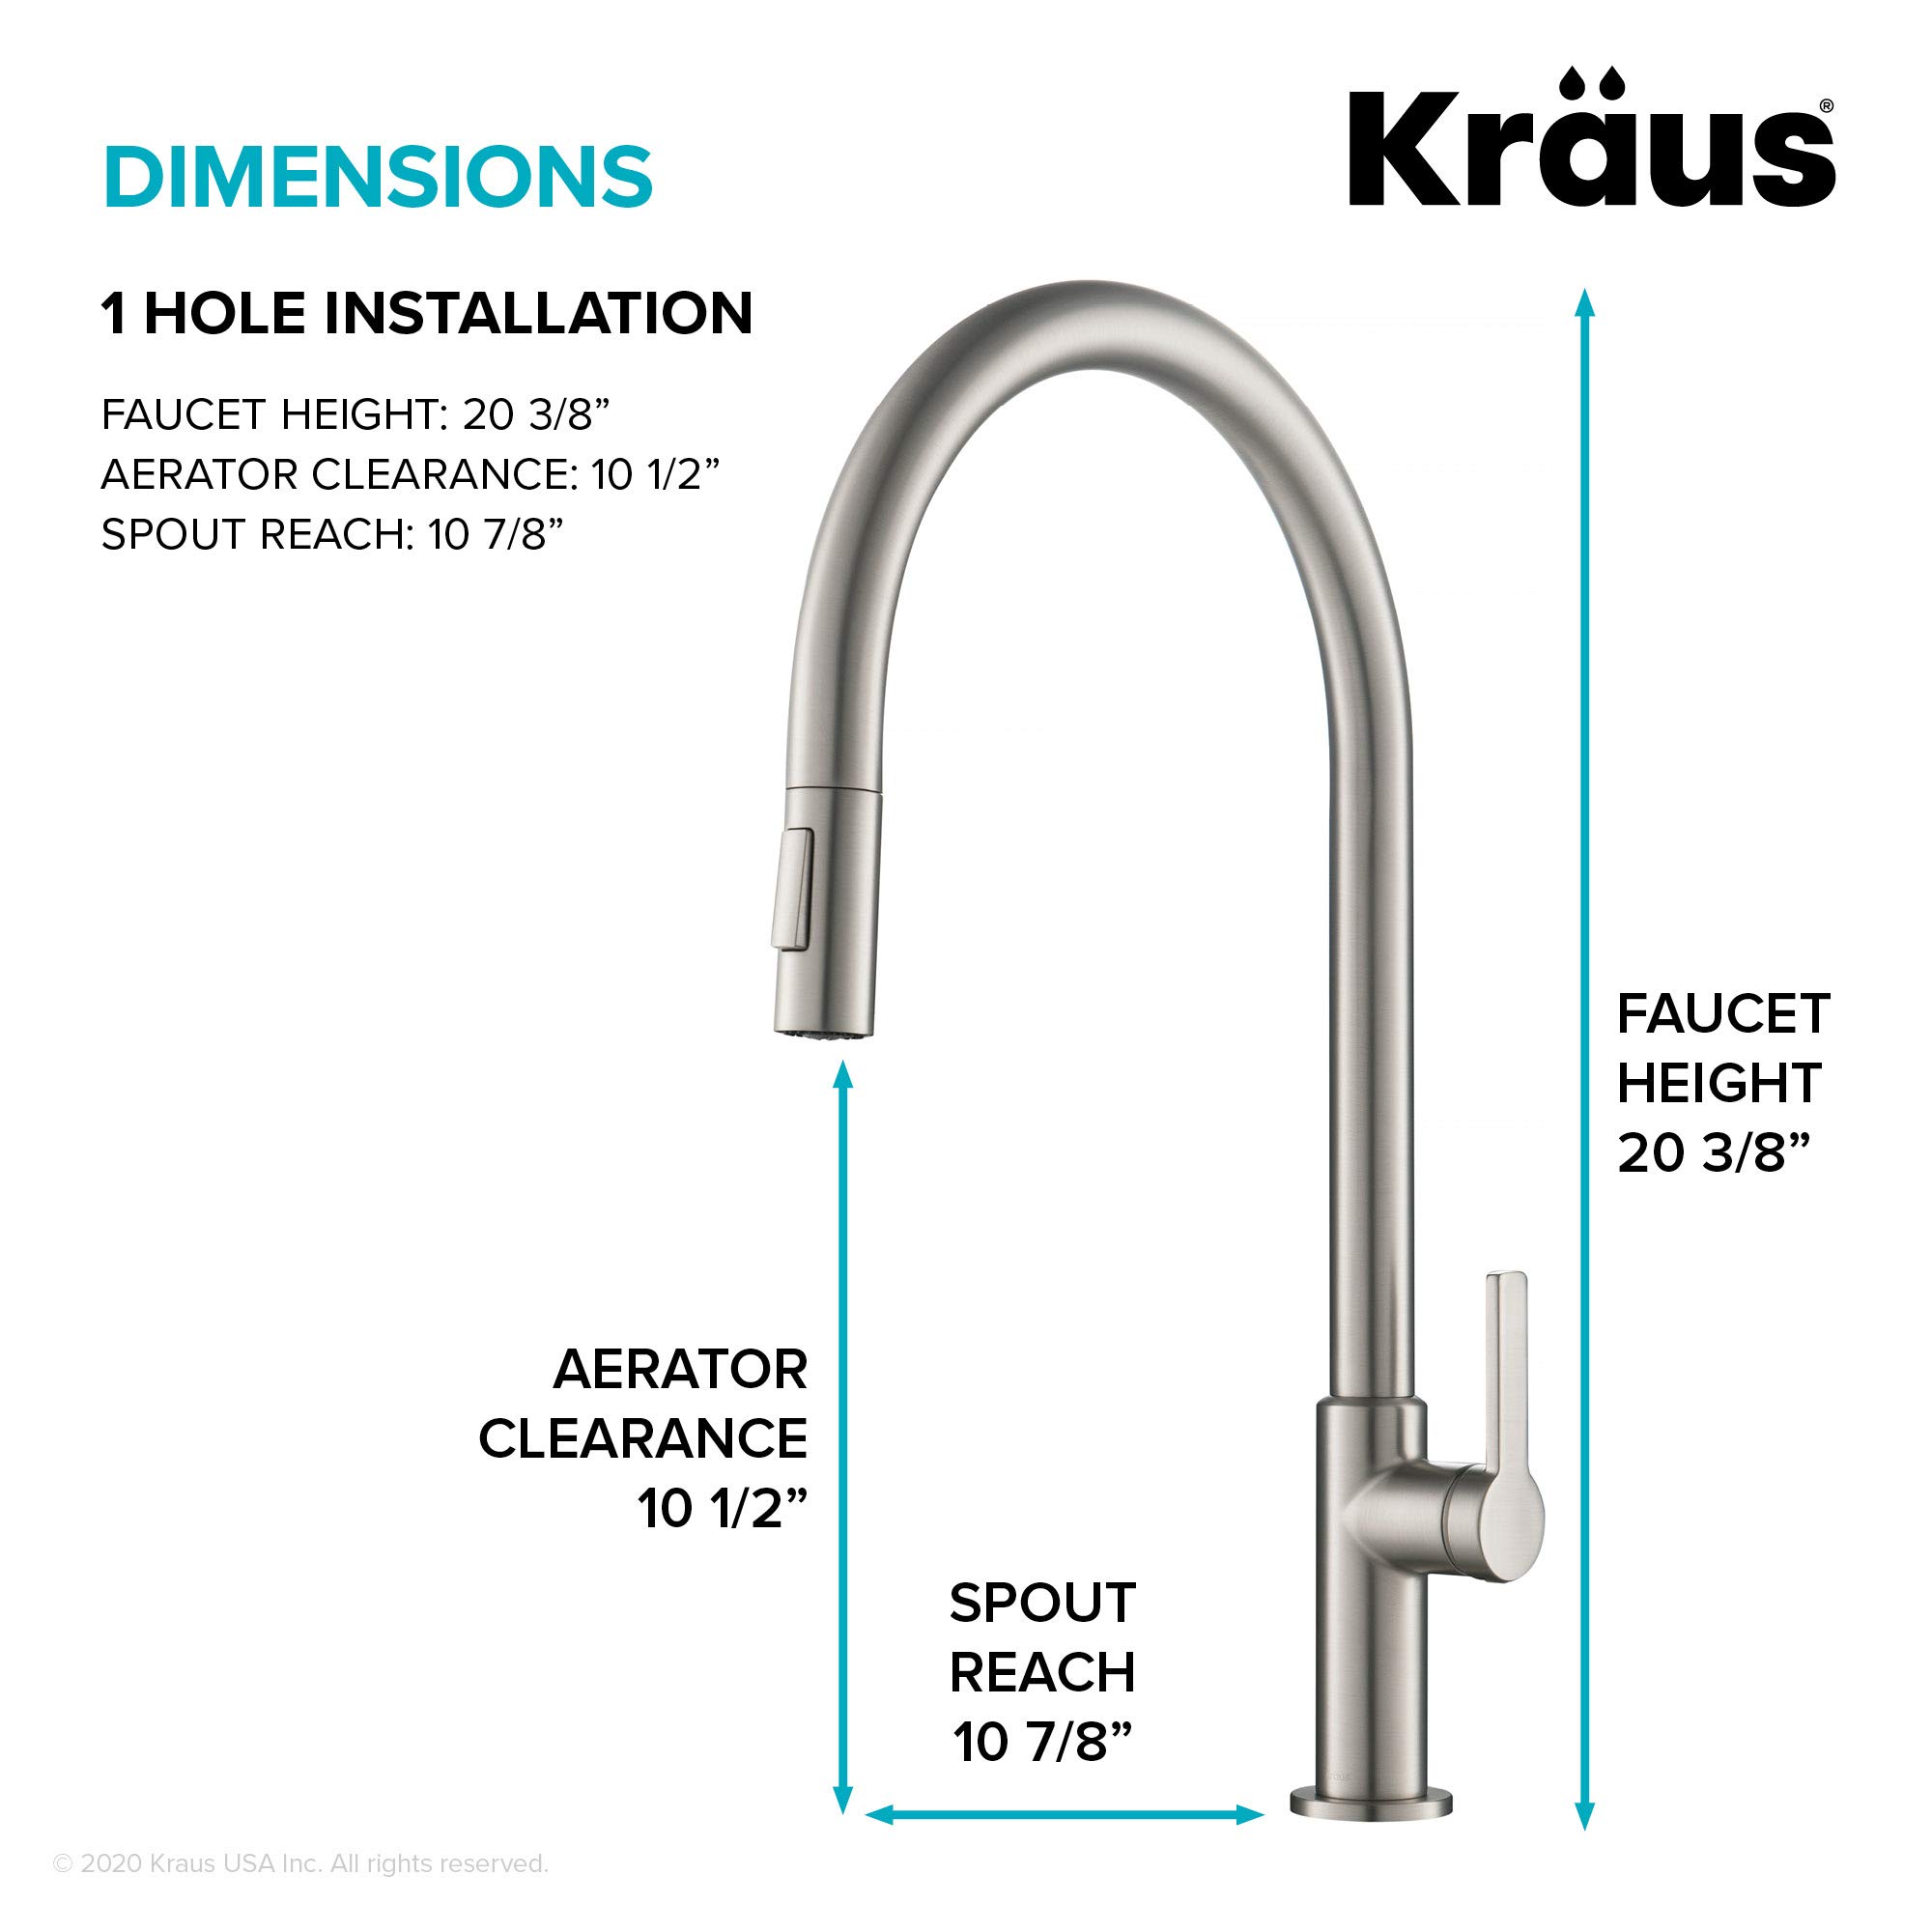 Kraus KPF-2821SFS Oletto High-Arc Single Handle Pull-Down Kitchen Faucet, 21 Inch, Spot Free Stainless Steel